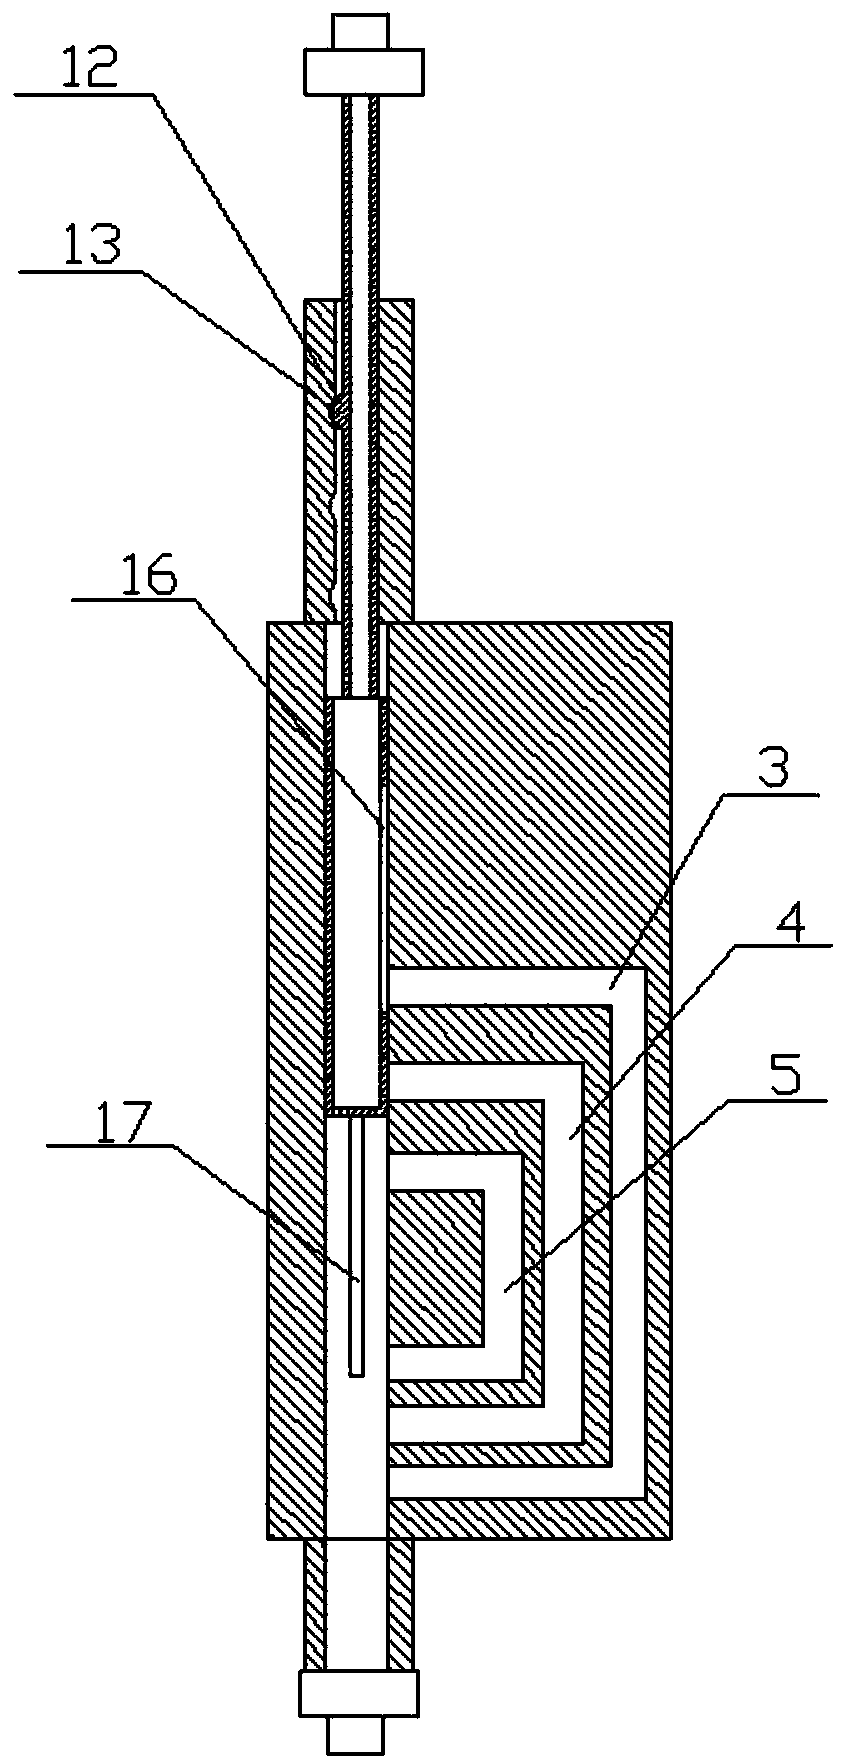 Multi-level flow control device applied to infusion pump